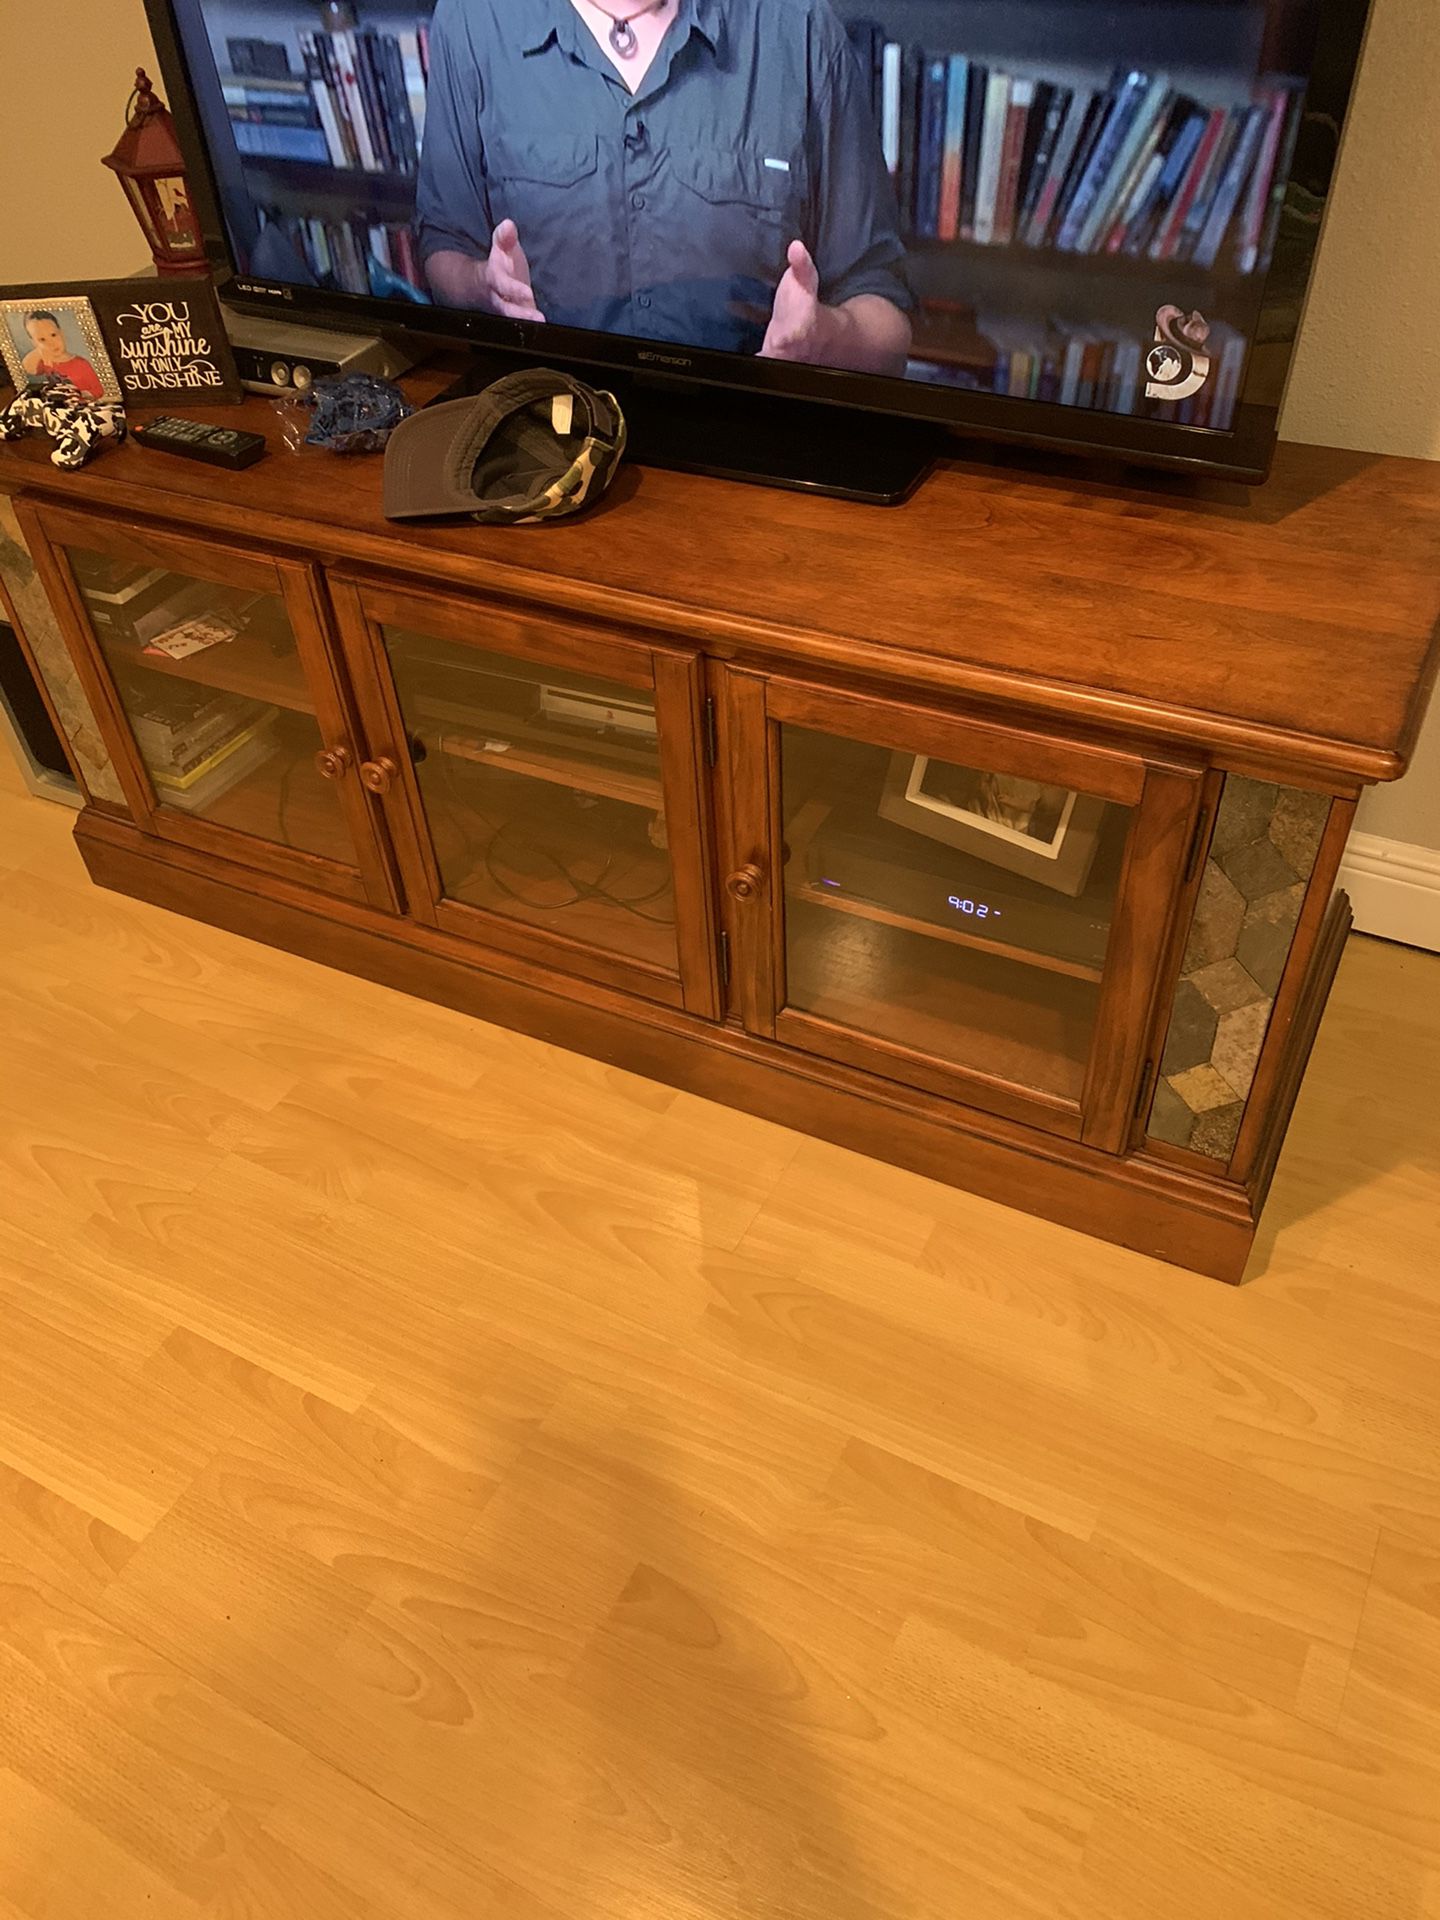 Tv stand. Real wood